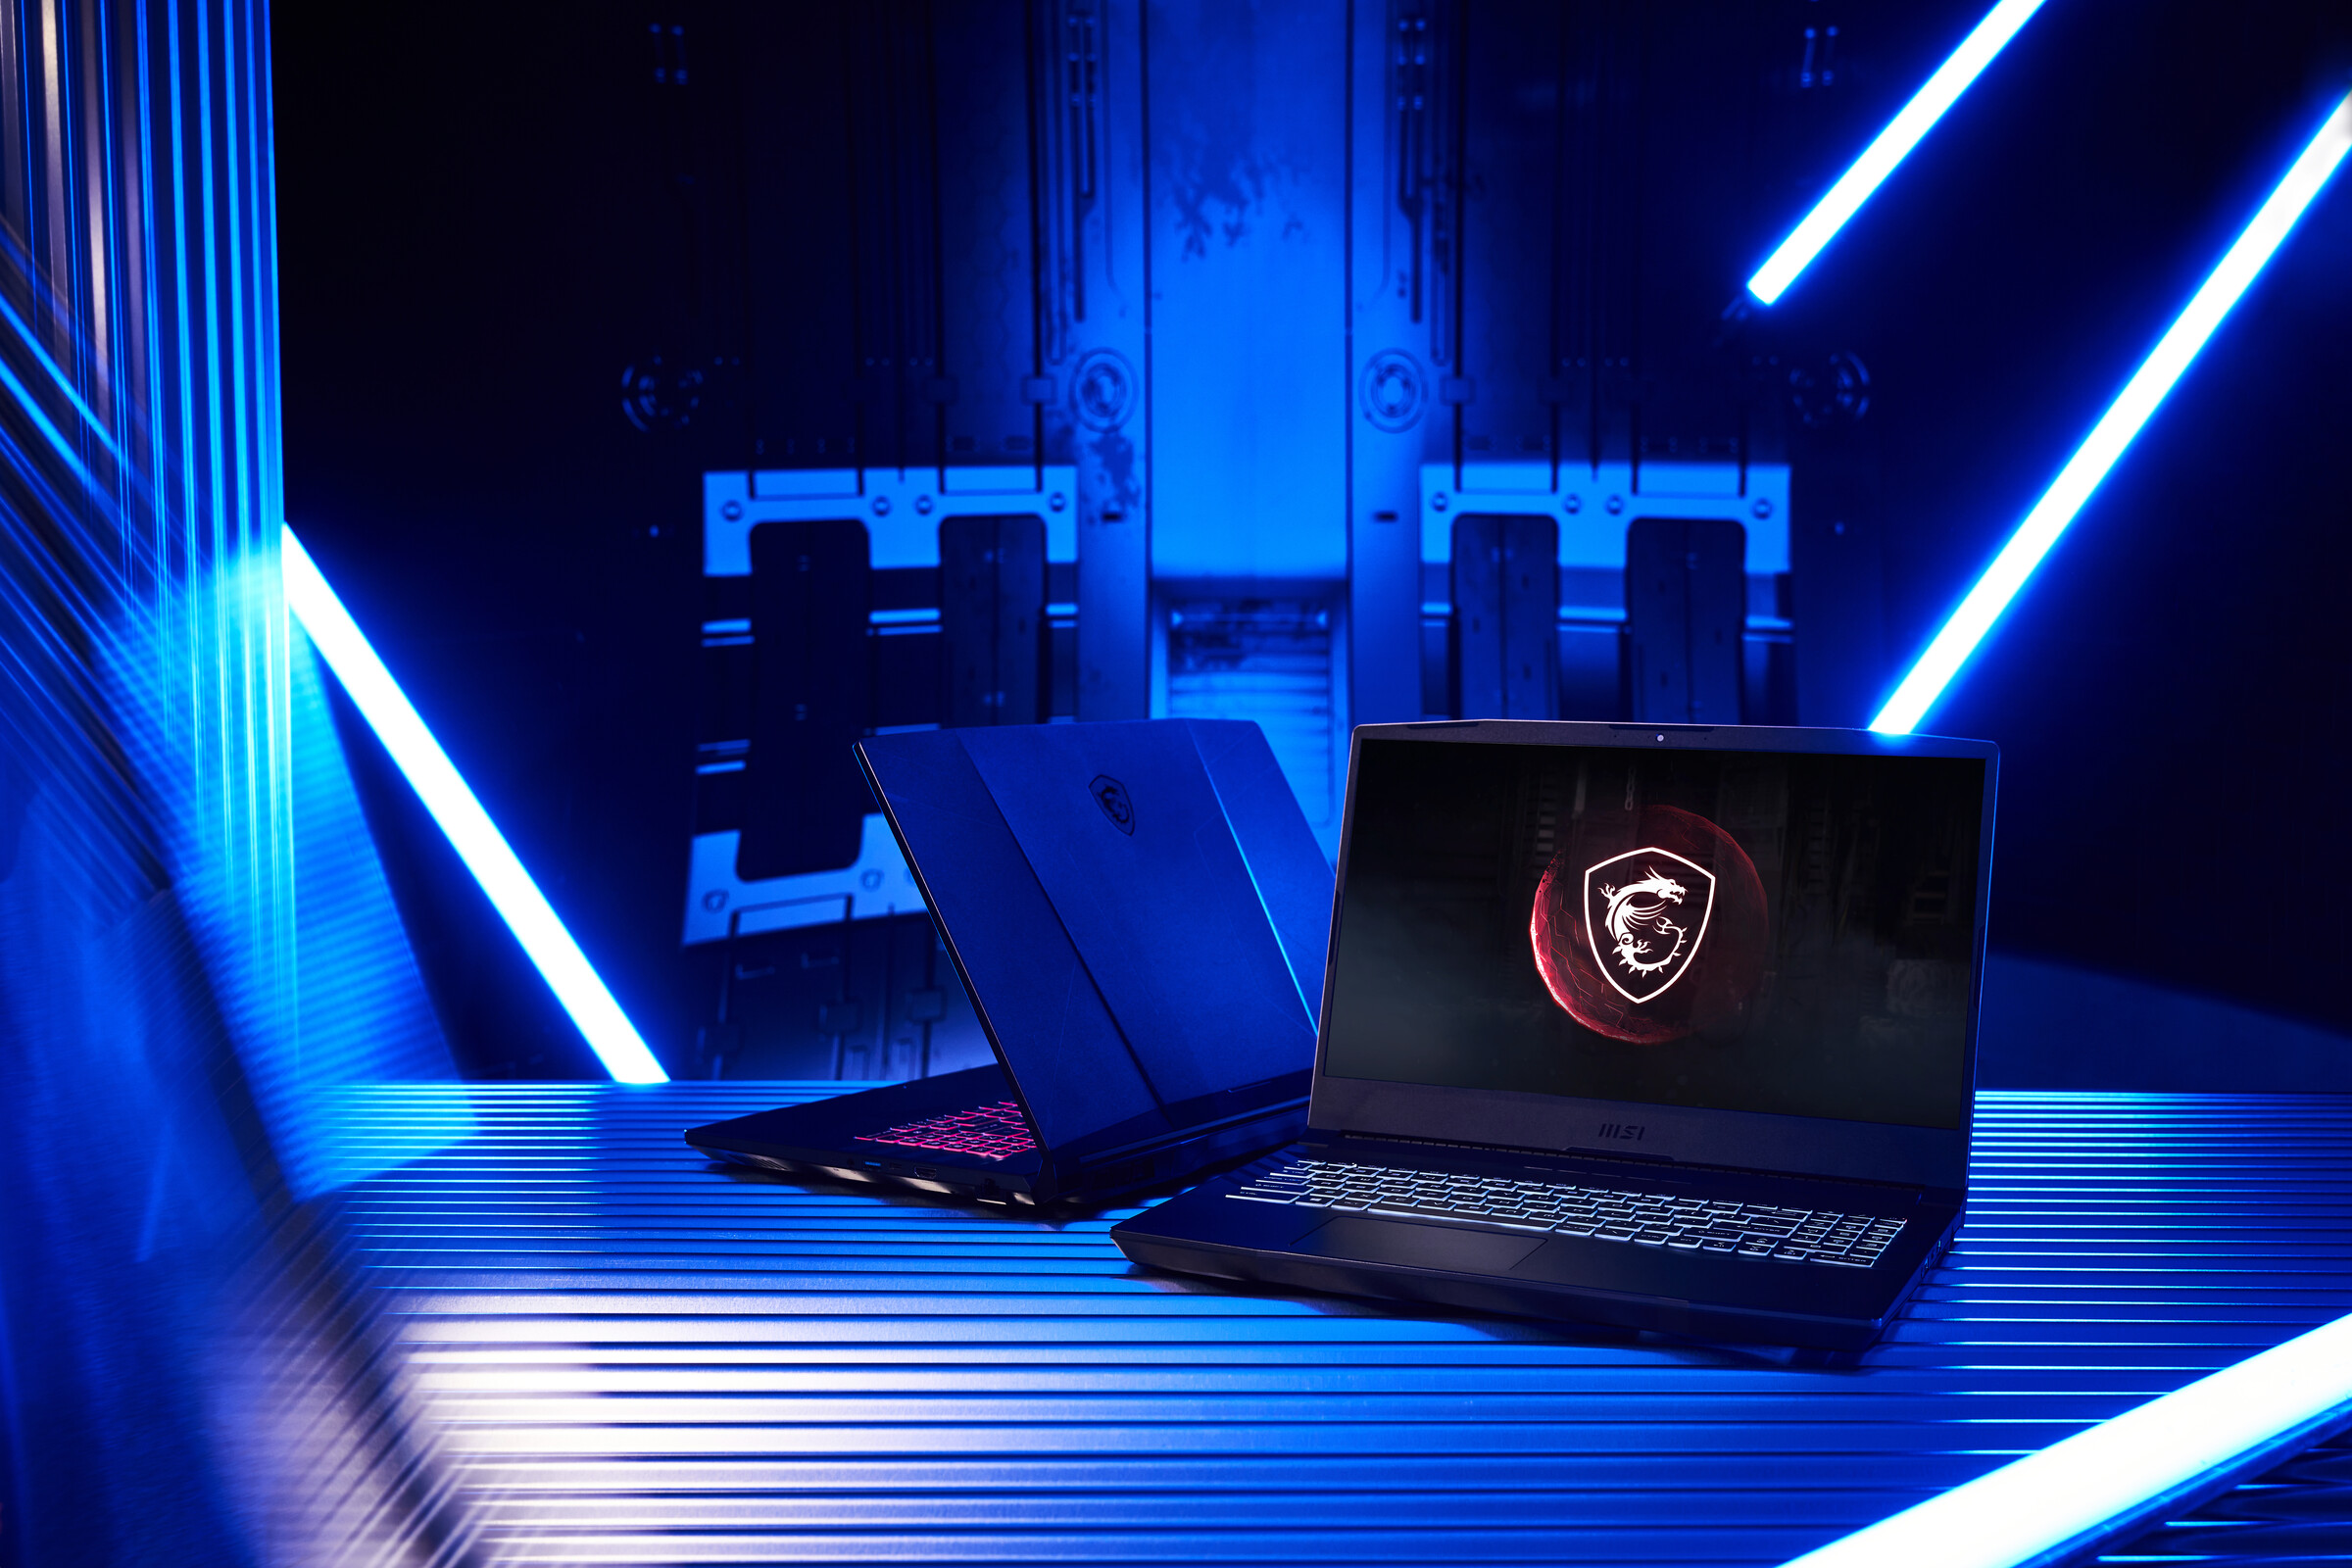 MSI Pulse GL66 gaming laptop is now official with new Intel Tiger Lake